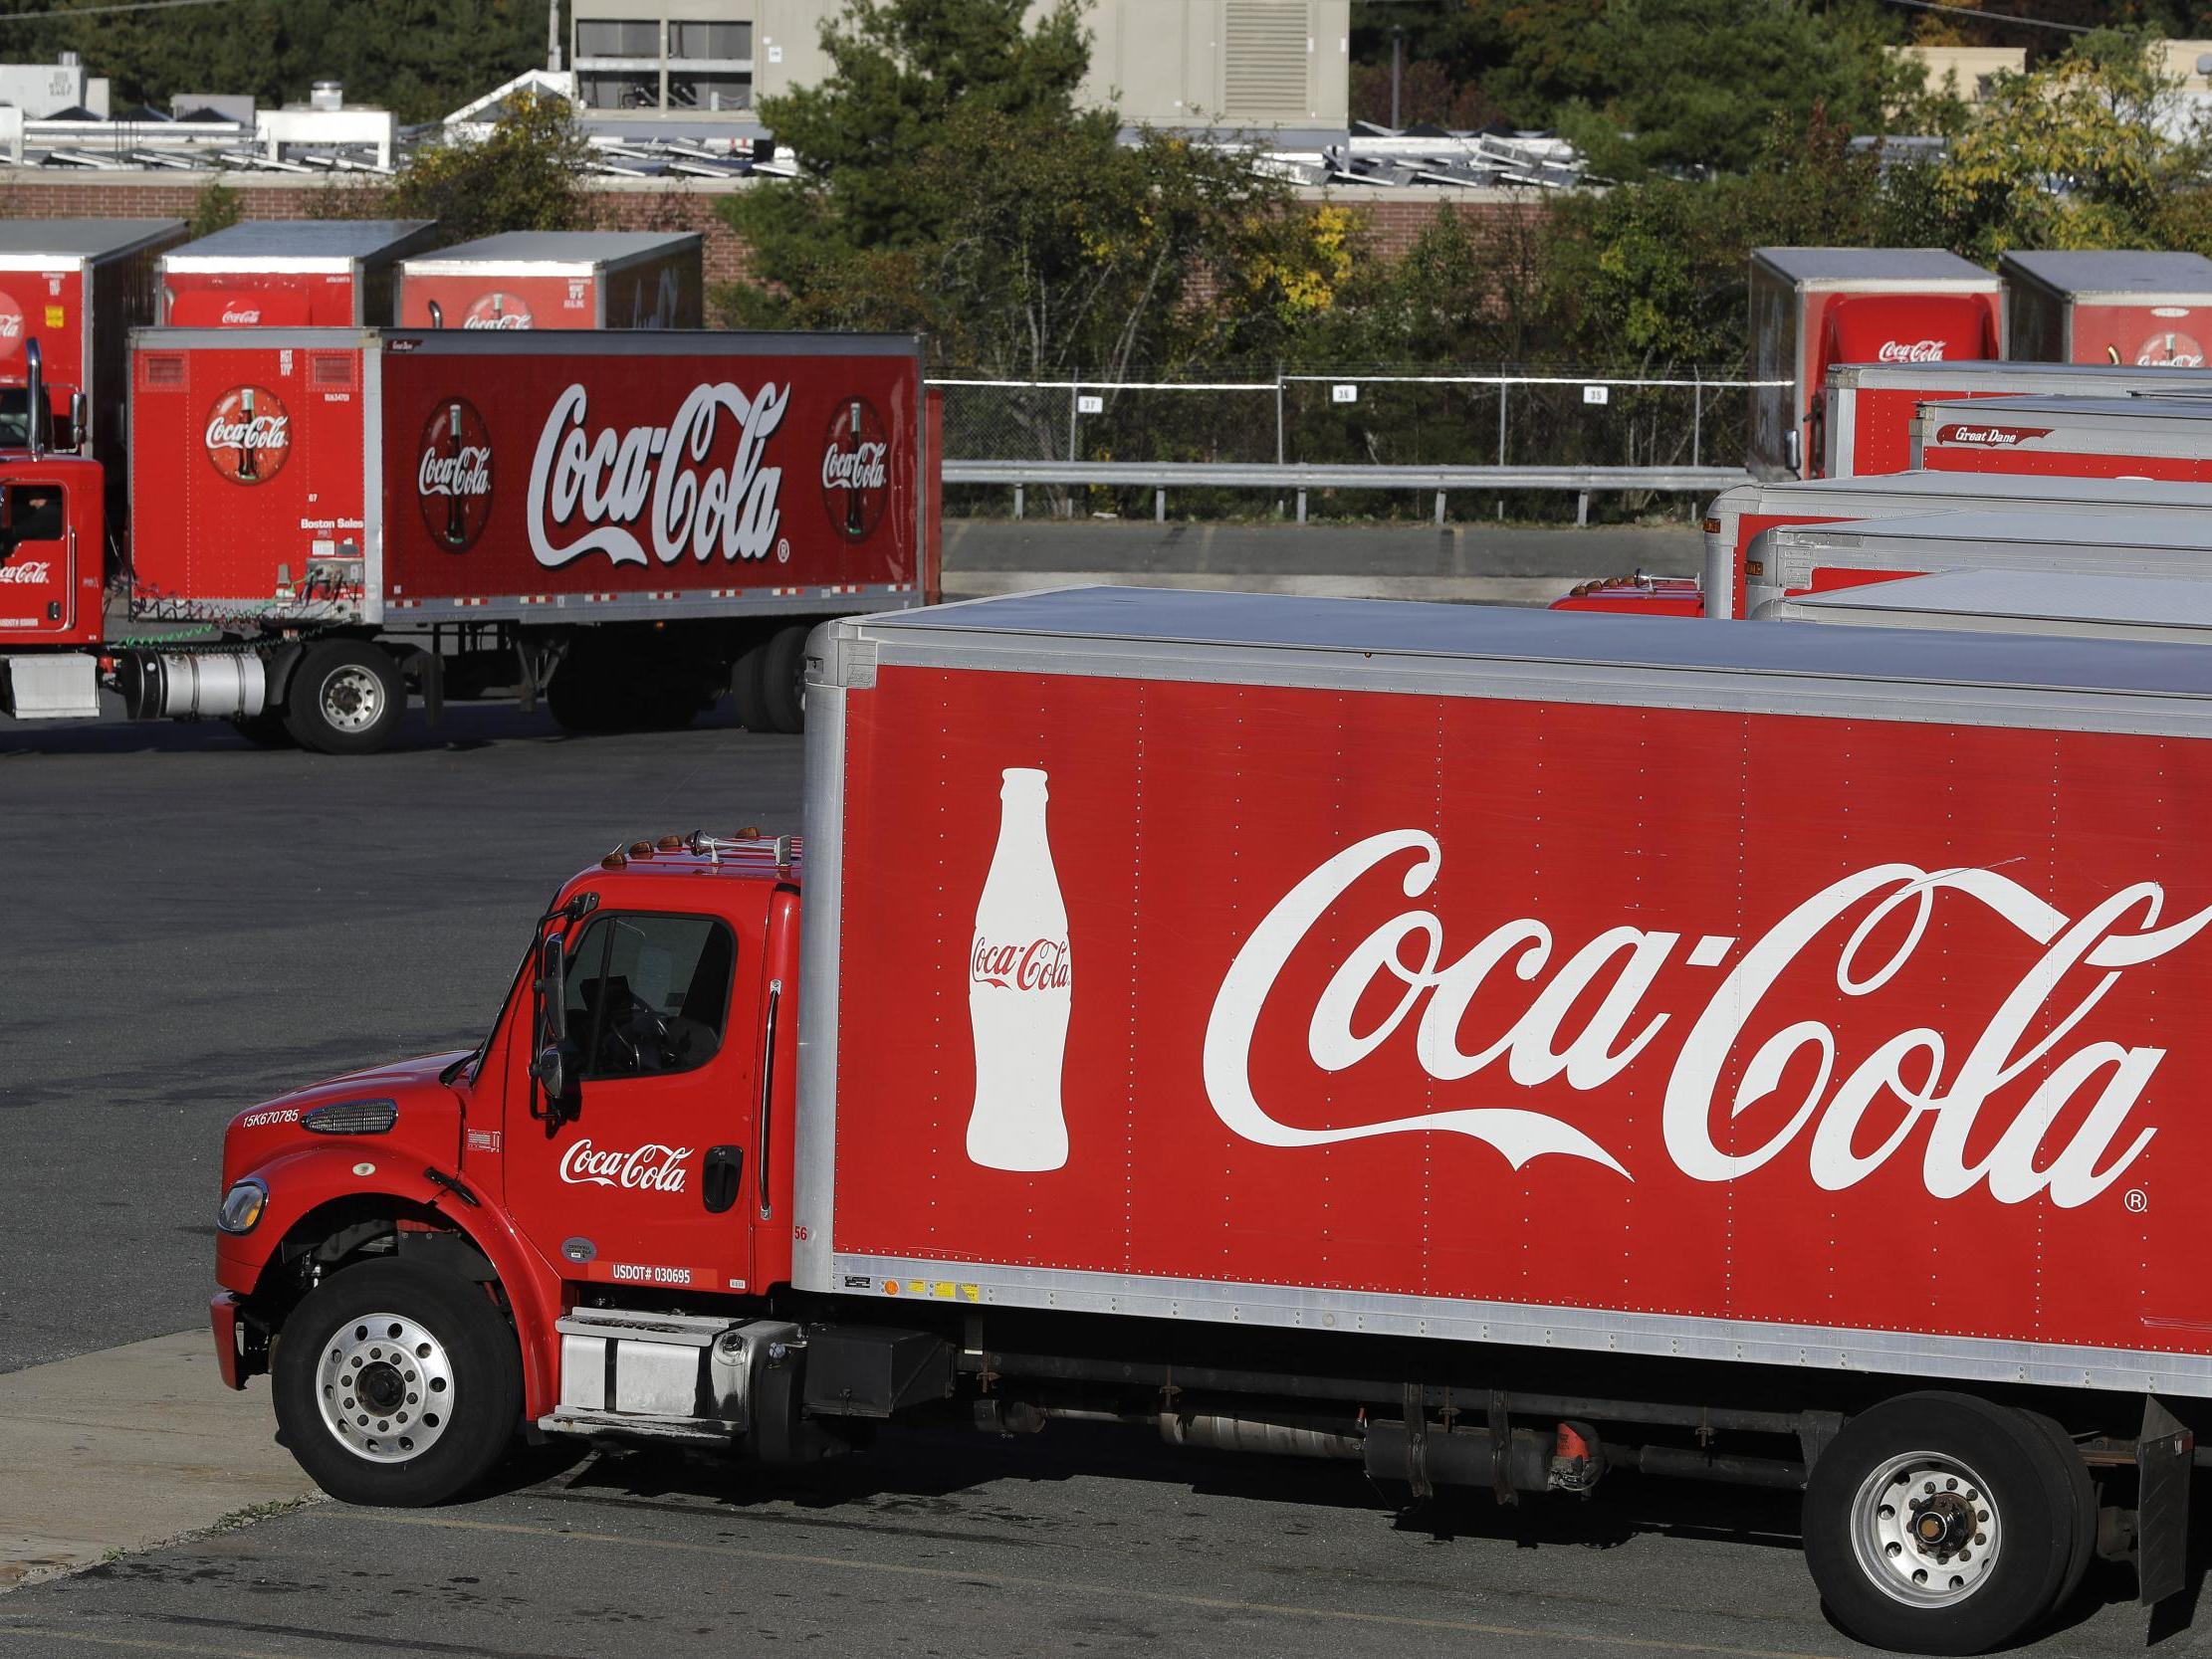 Coca-Cola is offering voluntary buyout packages to approximately 4,000 employees